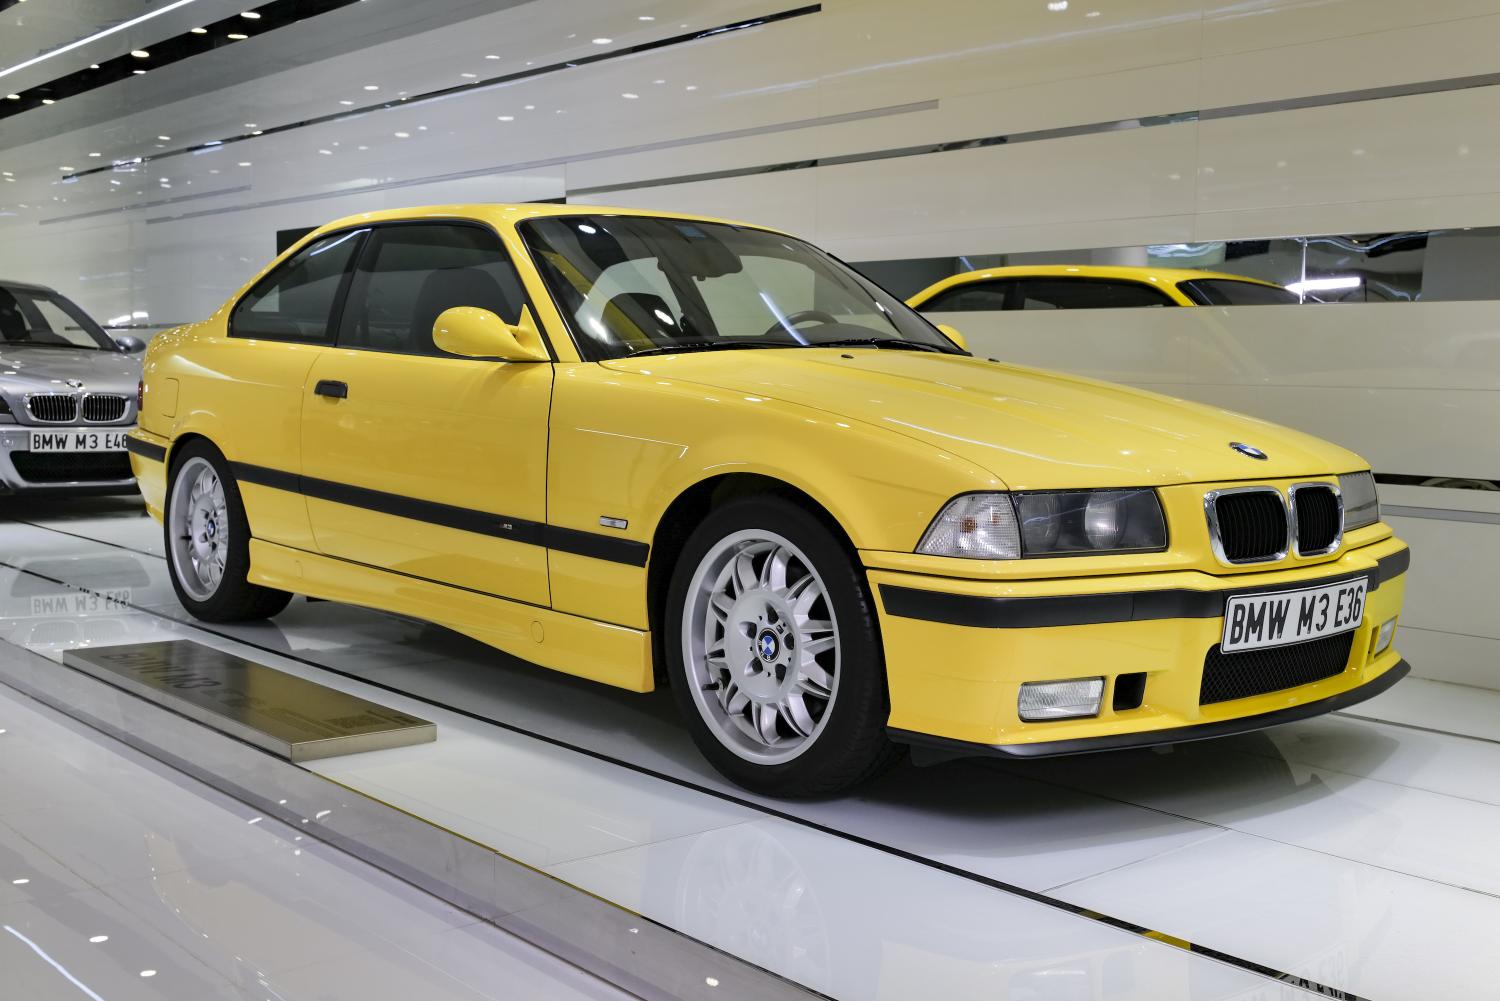 £250,000 E36 M3 Among Bonkers BMW Auction Results Last Weekend